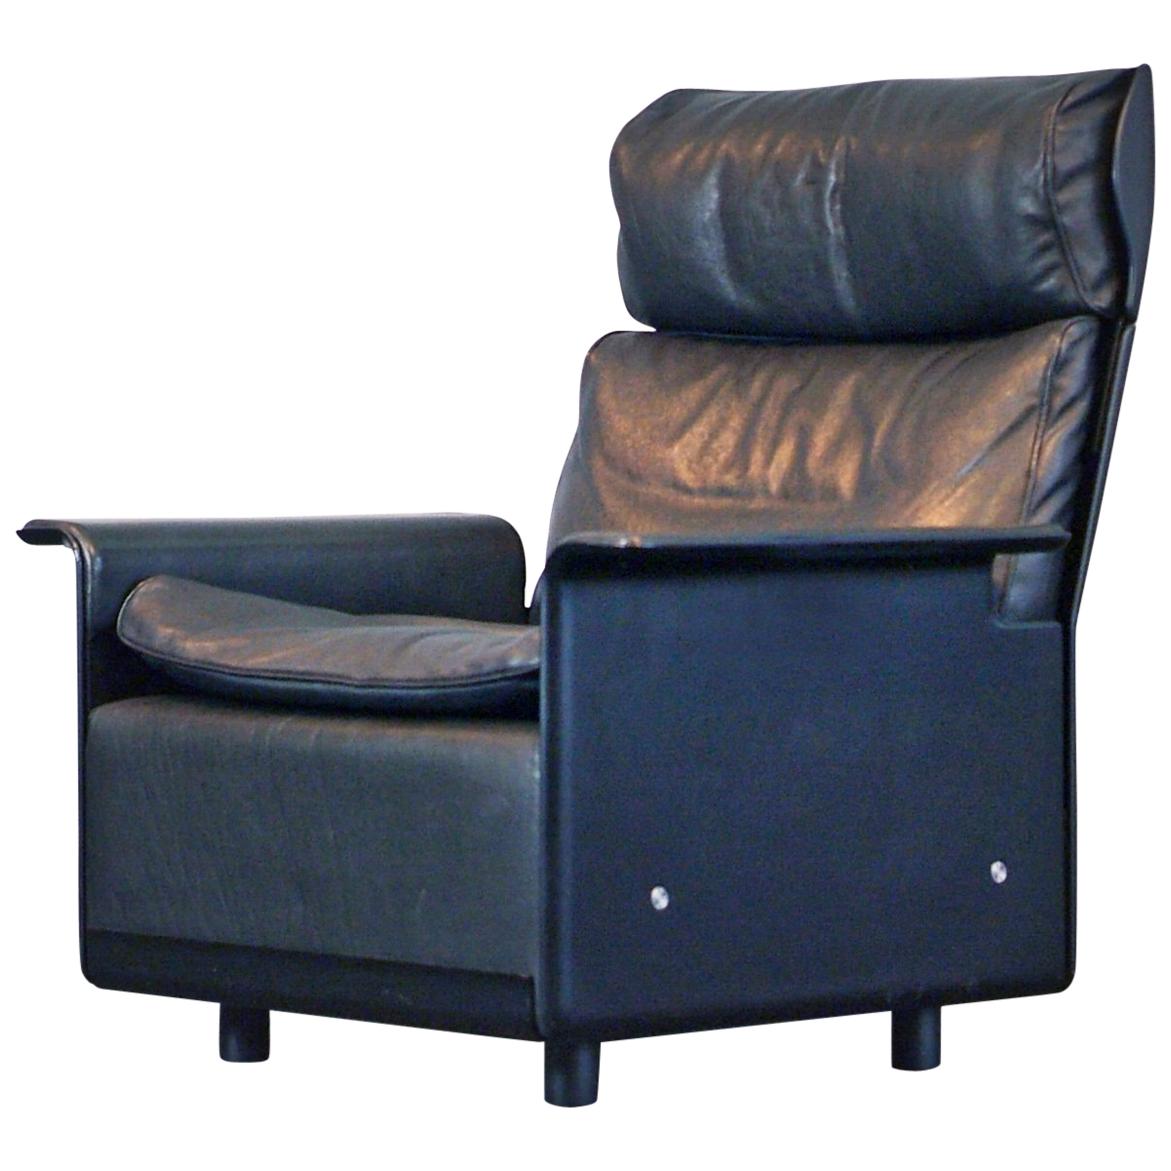 Highback Leather Lounge Chair Mod. 620 by Dieter Rams for Vitsoe Black Leather